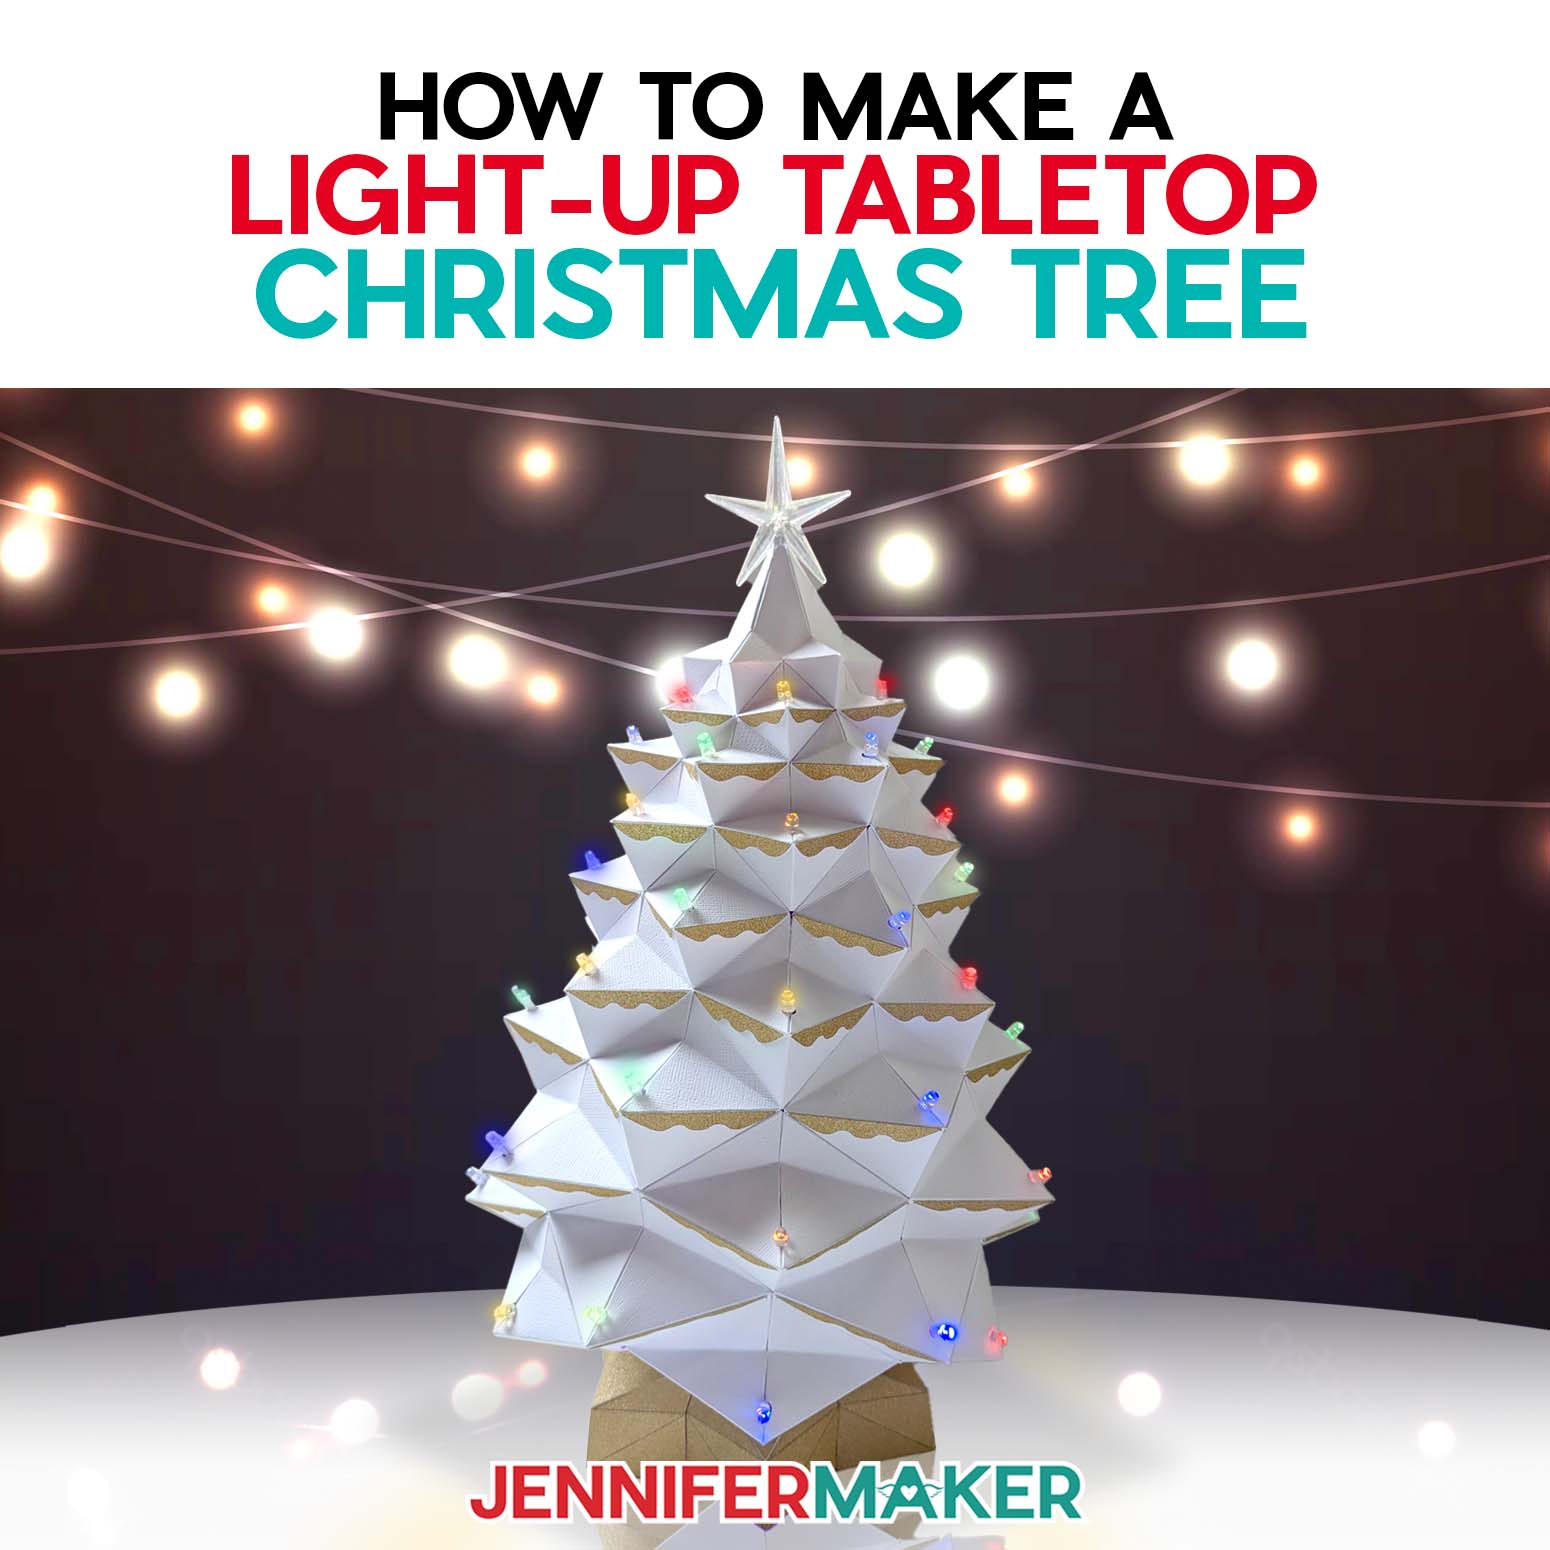 Lean how to make a light-up tabletop Christmas tree for the holidays with JenniferMaker's tutorial! An elaborate white cardstock Christmas tree glows with multicolored lights against a dark backdrop studded in twinkle lights.